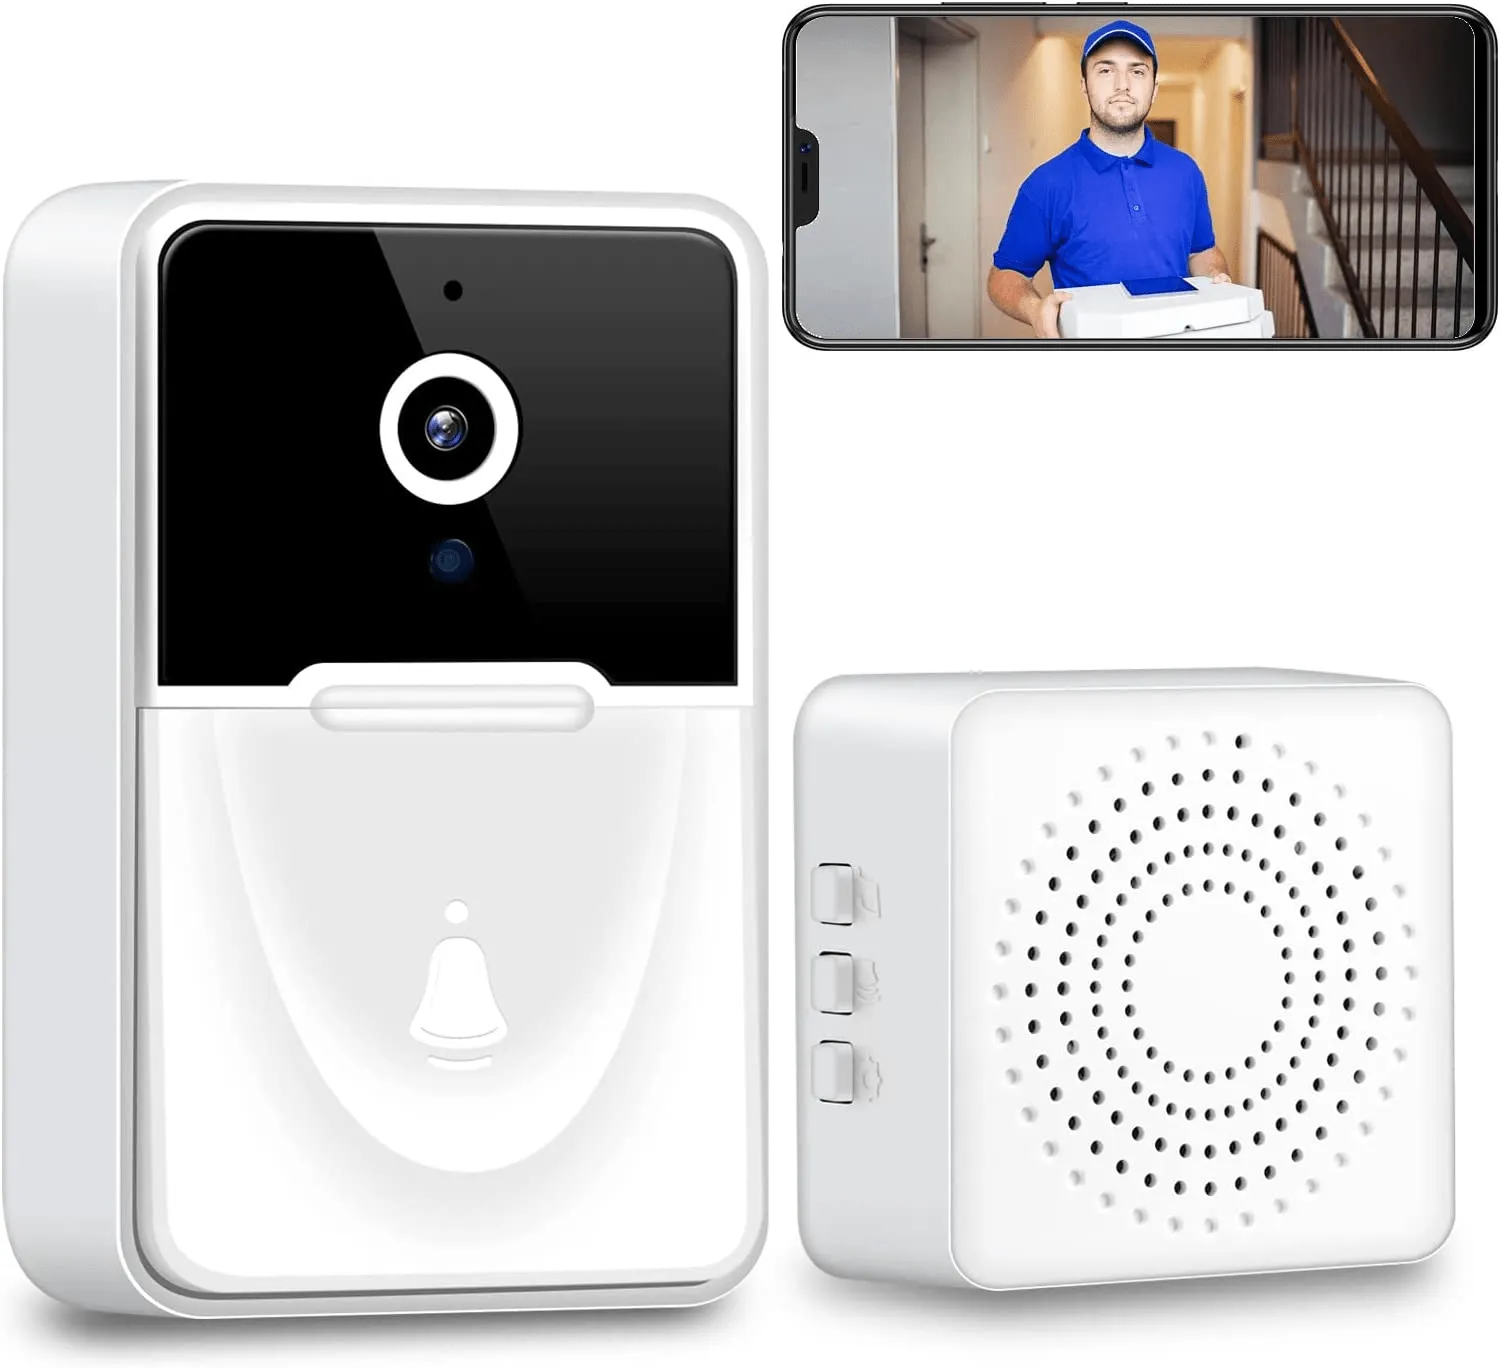 Wireless Doorbell Camera with Chime